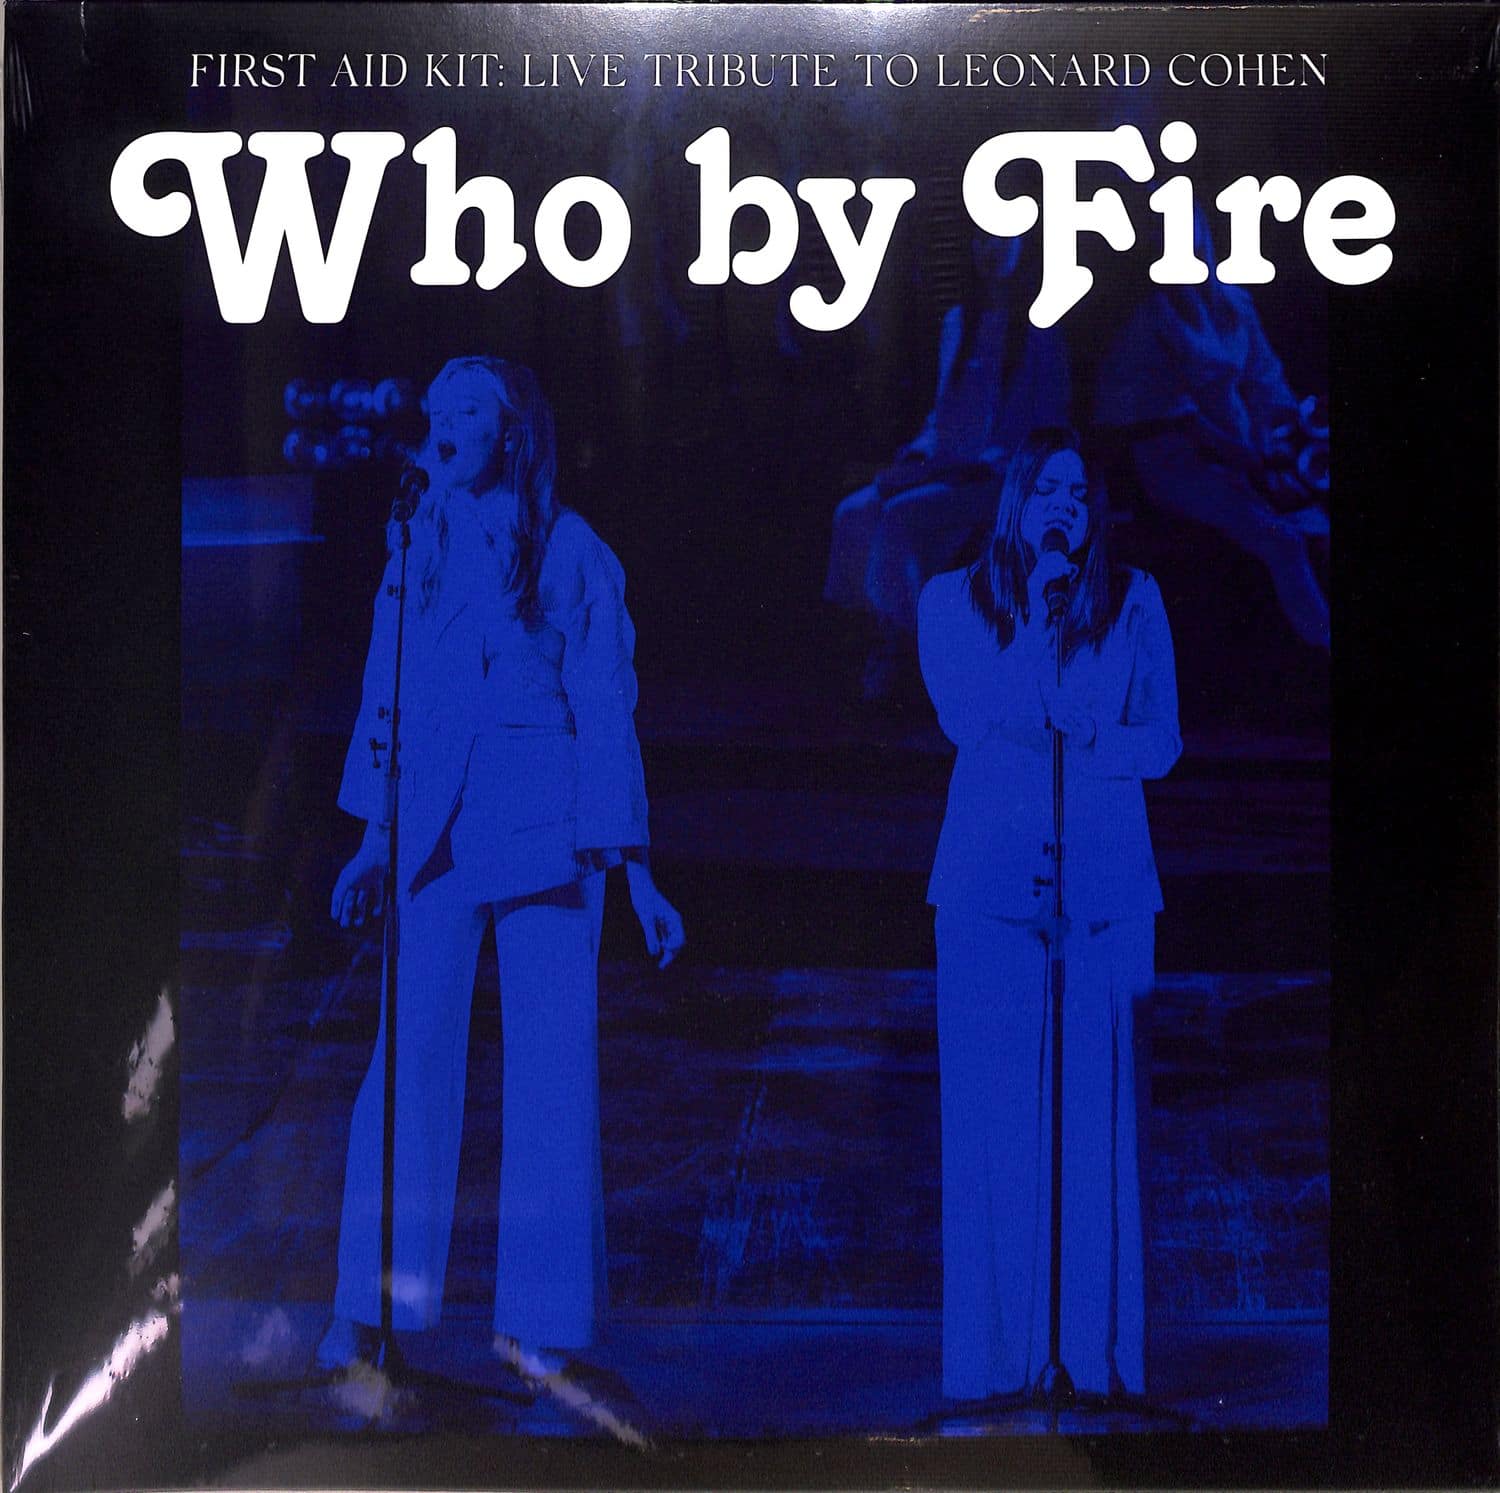 First Aid Kit - WHO BY FIRE - LIVE TRIBUTE TO LEONARD COHEN 